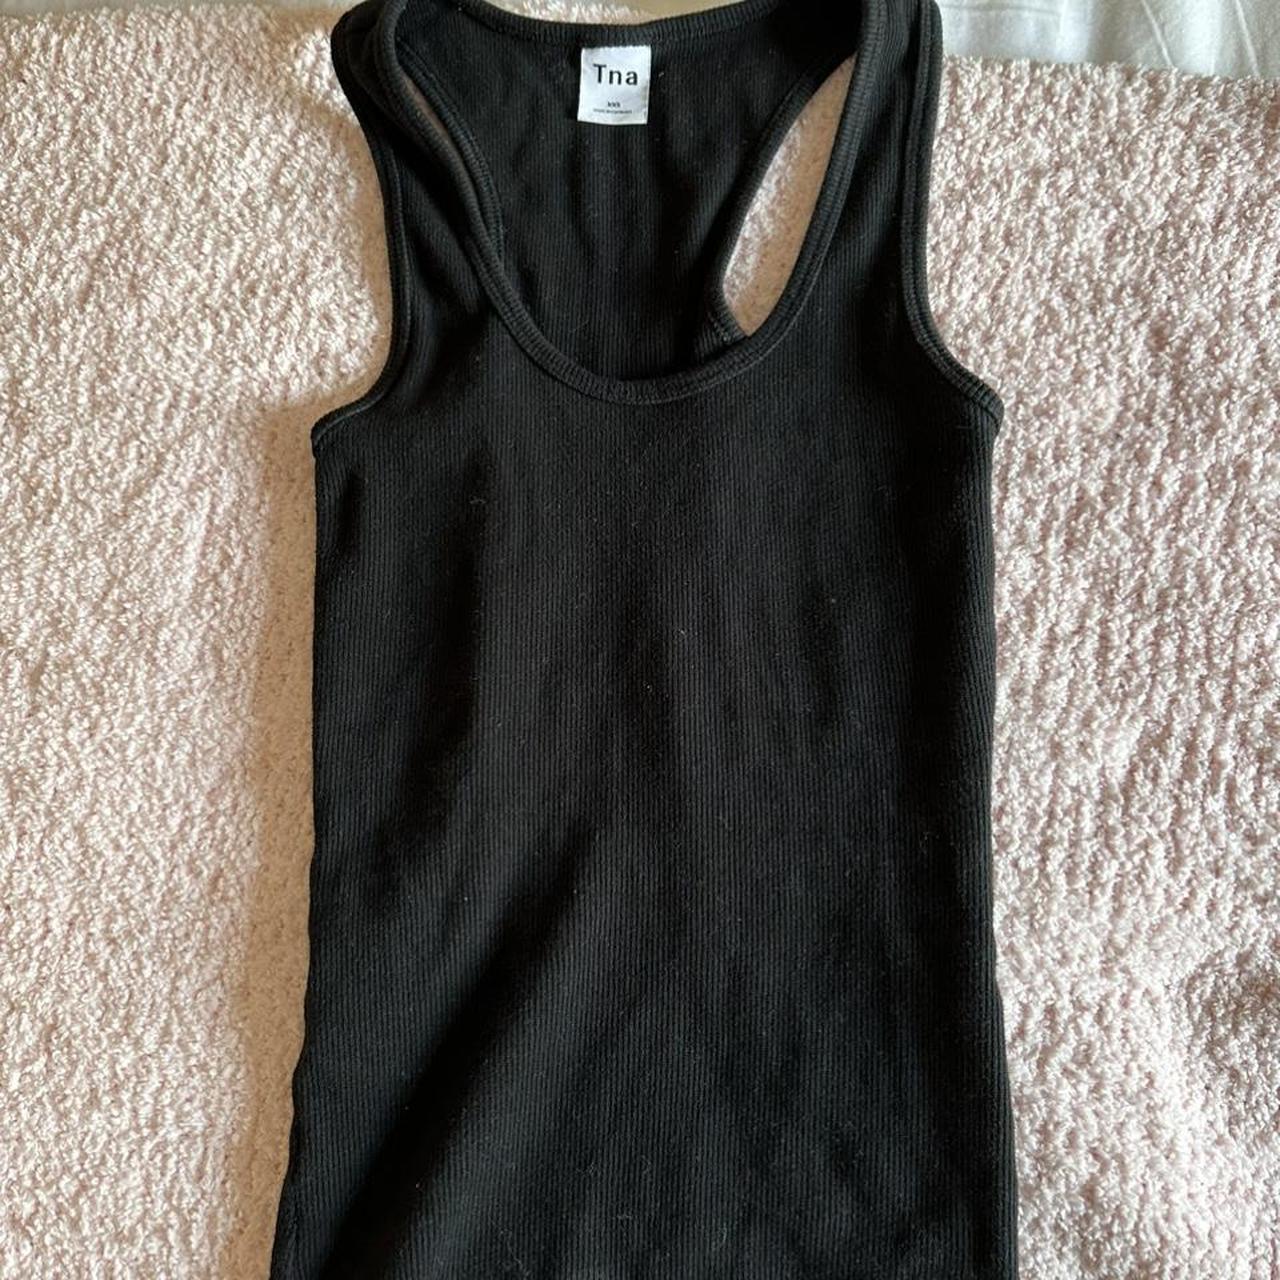 Black tank top (thick material) from TNA - Depop